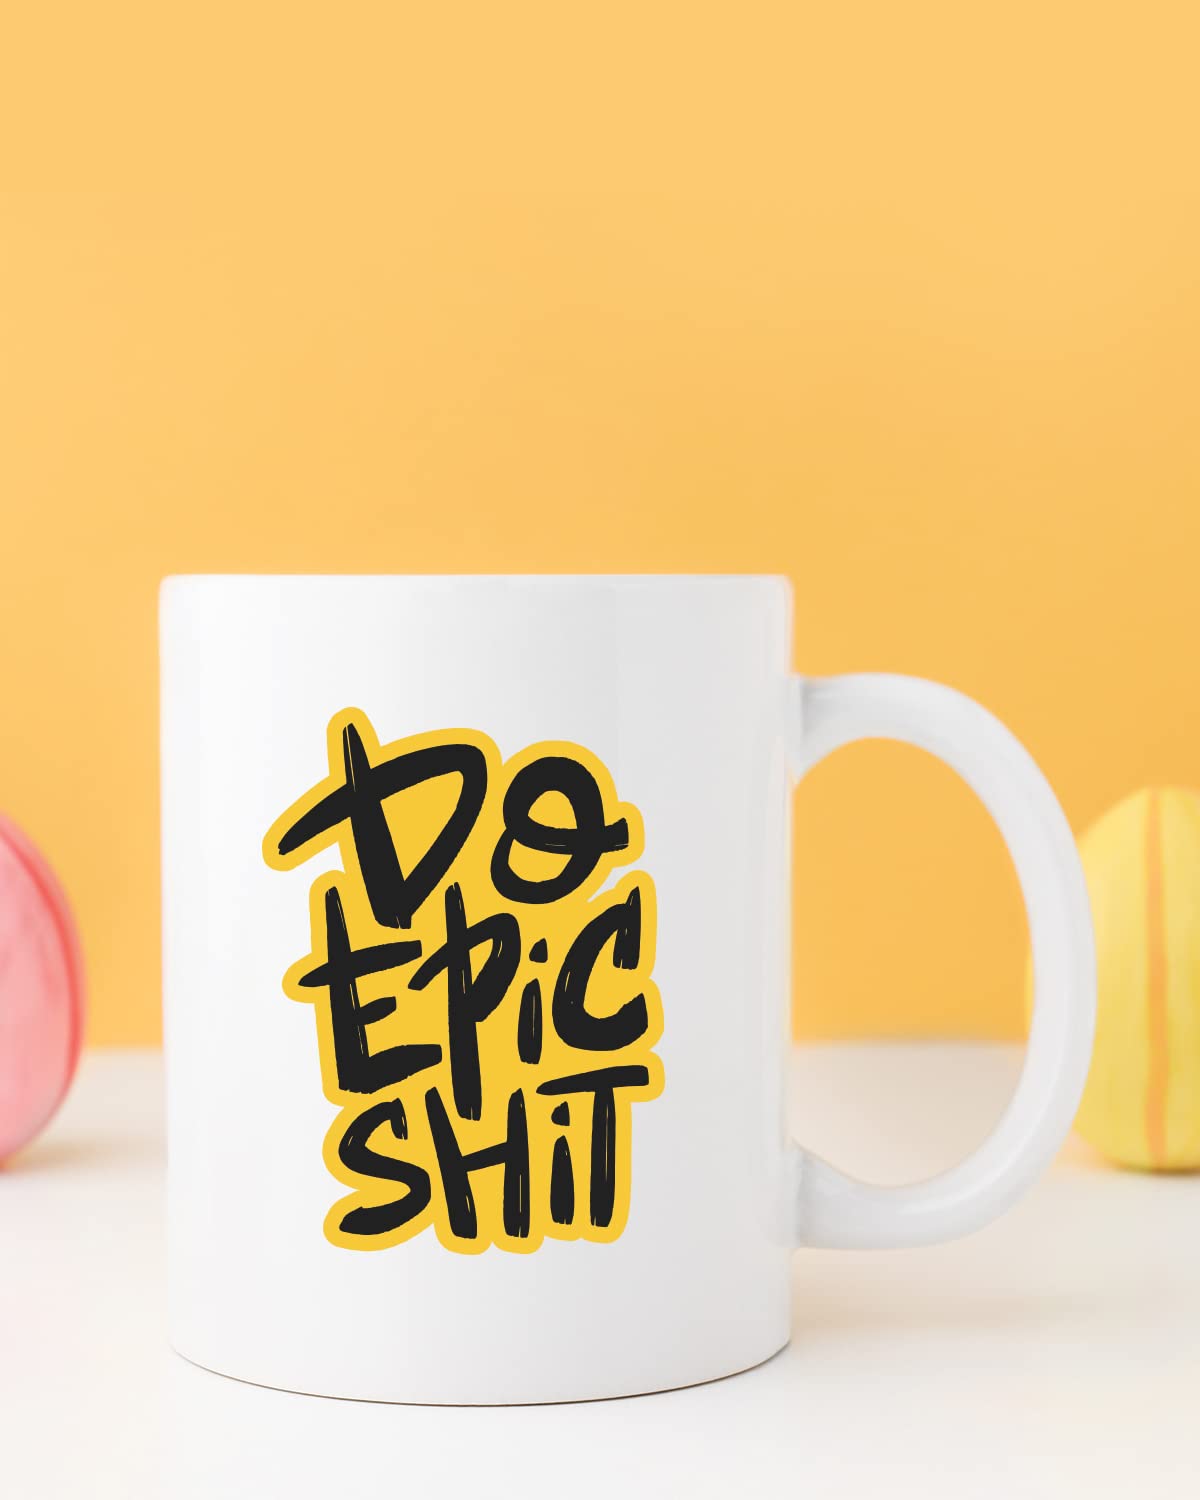 DO Epic Shit Coffee Mug - Birthday Gift, Motivational Mug, Printed with Inspiring Quotes, Positivity Mug, Inspirational Gift for Him & Her, Best Friend Gift, Gifts for Her, Cheer Up Gift